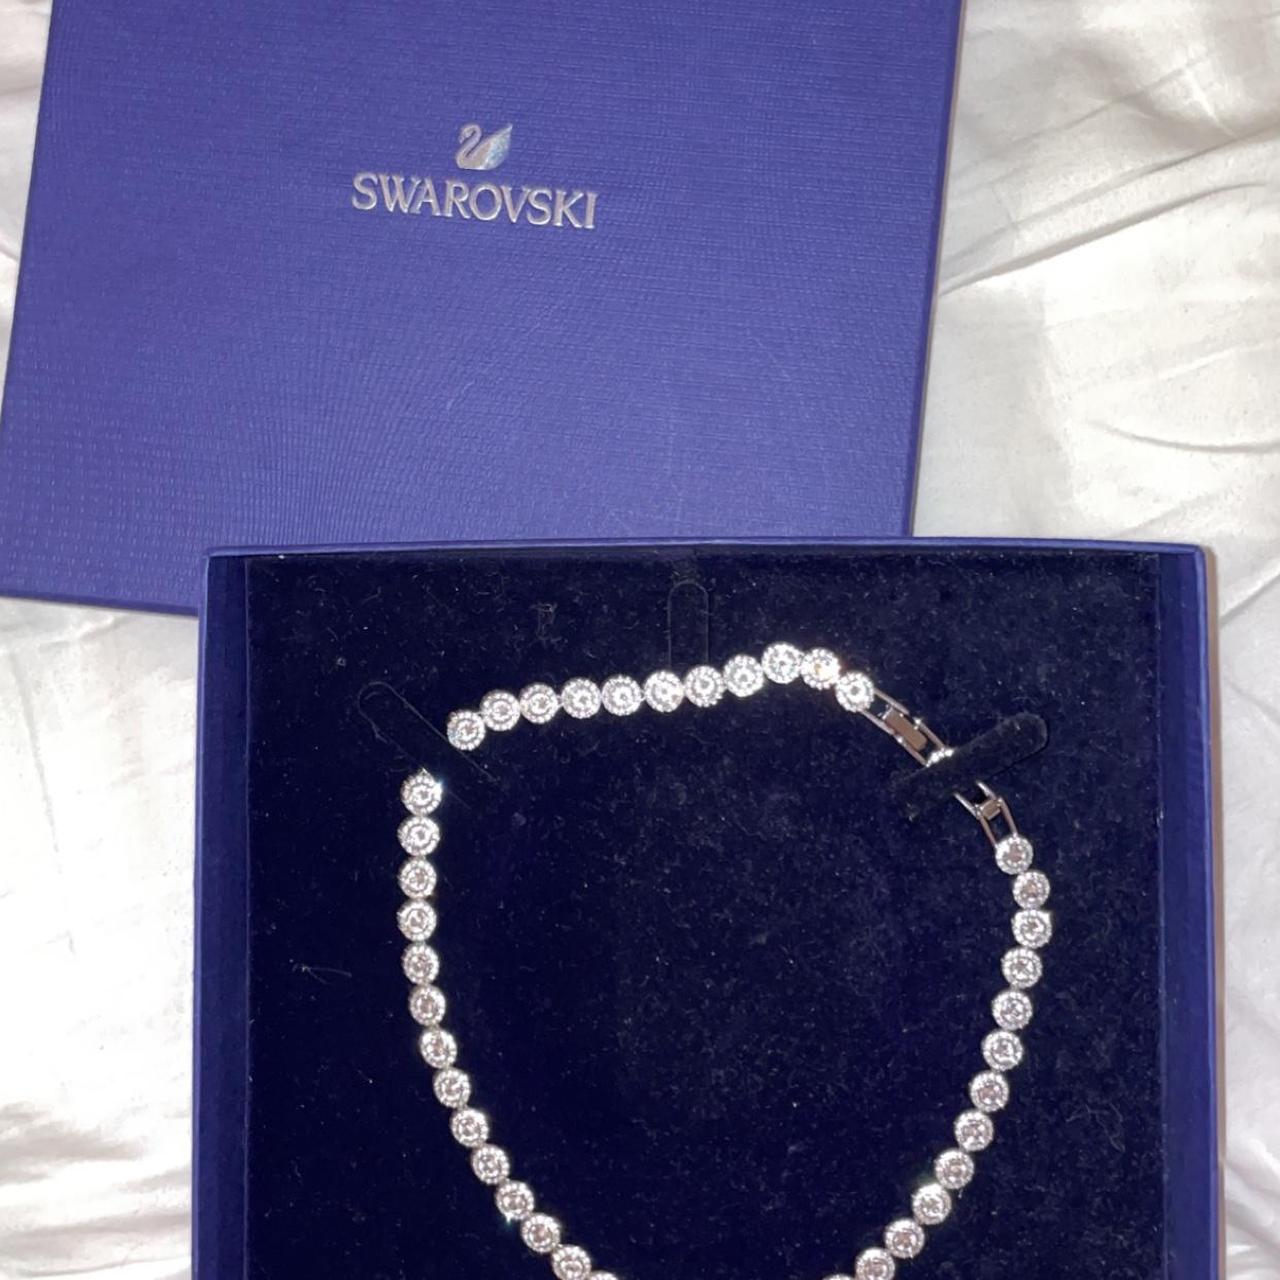 $59.95 for a Swarovski Angelic Necklace (a $215 Value) | WagJag